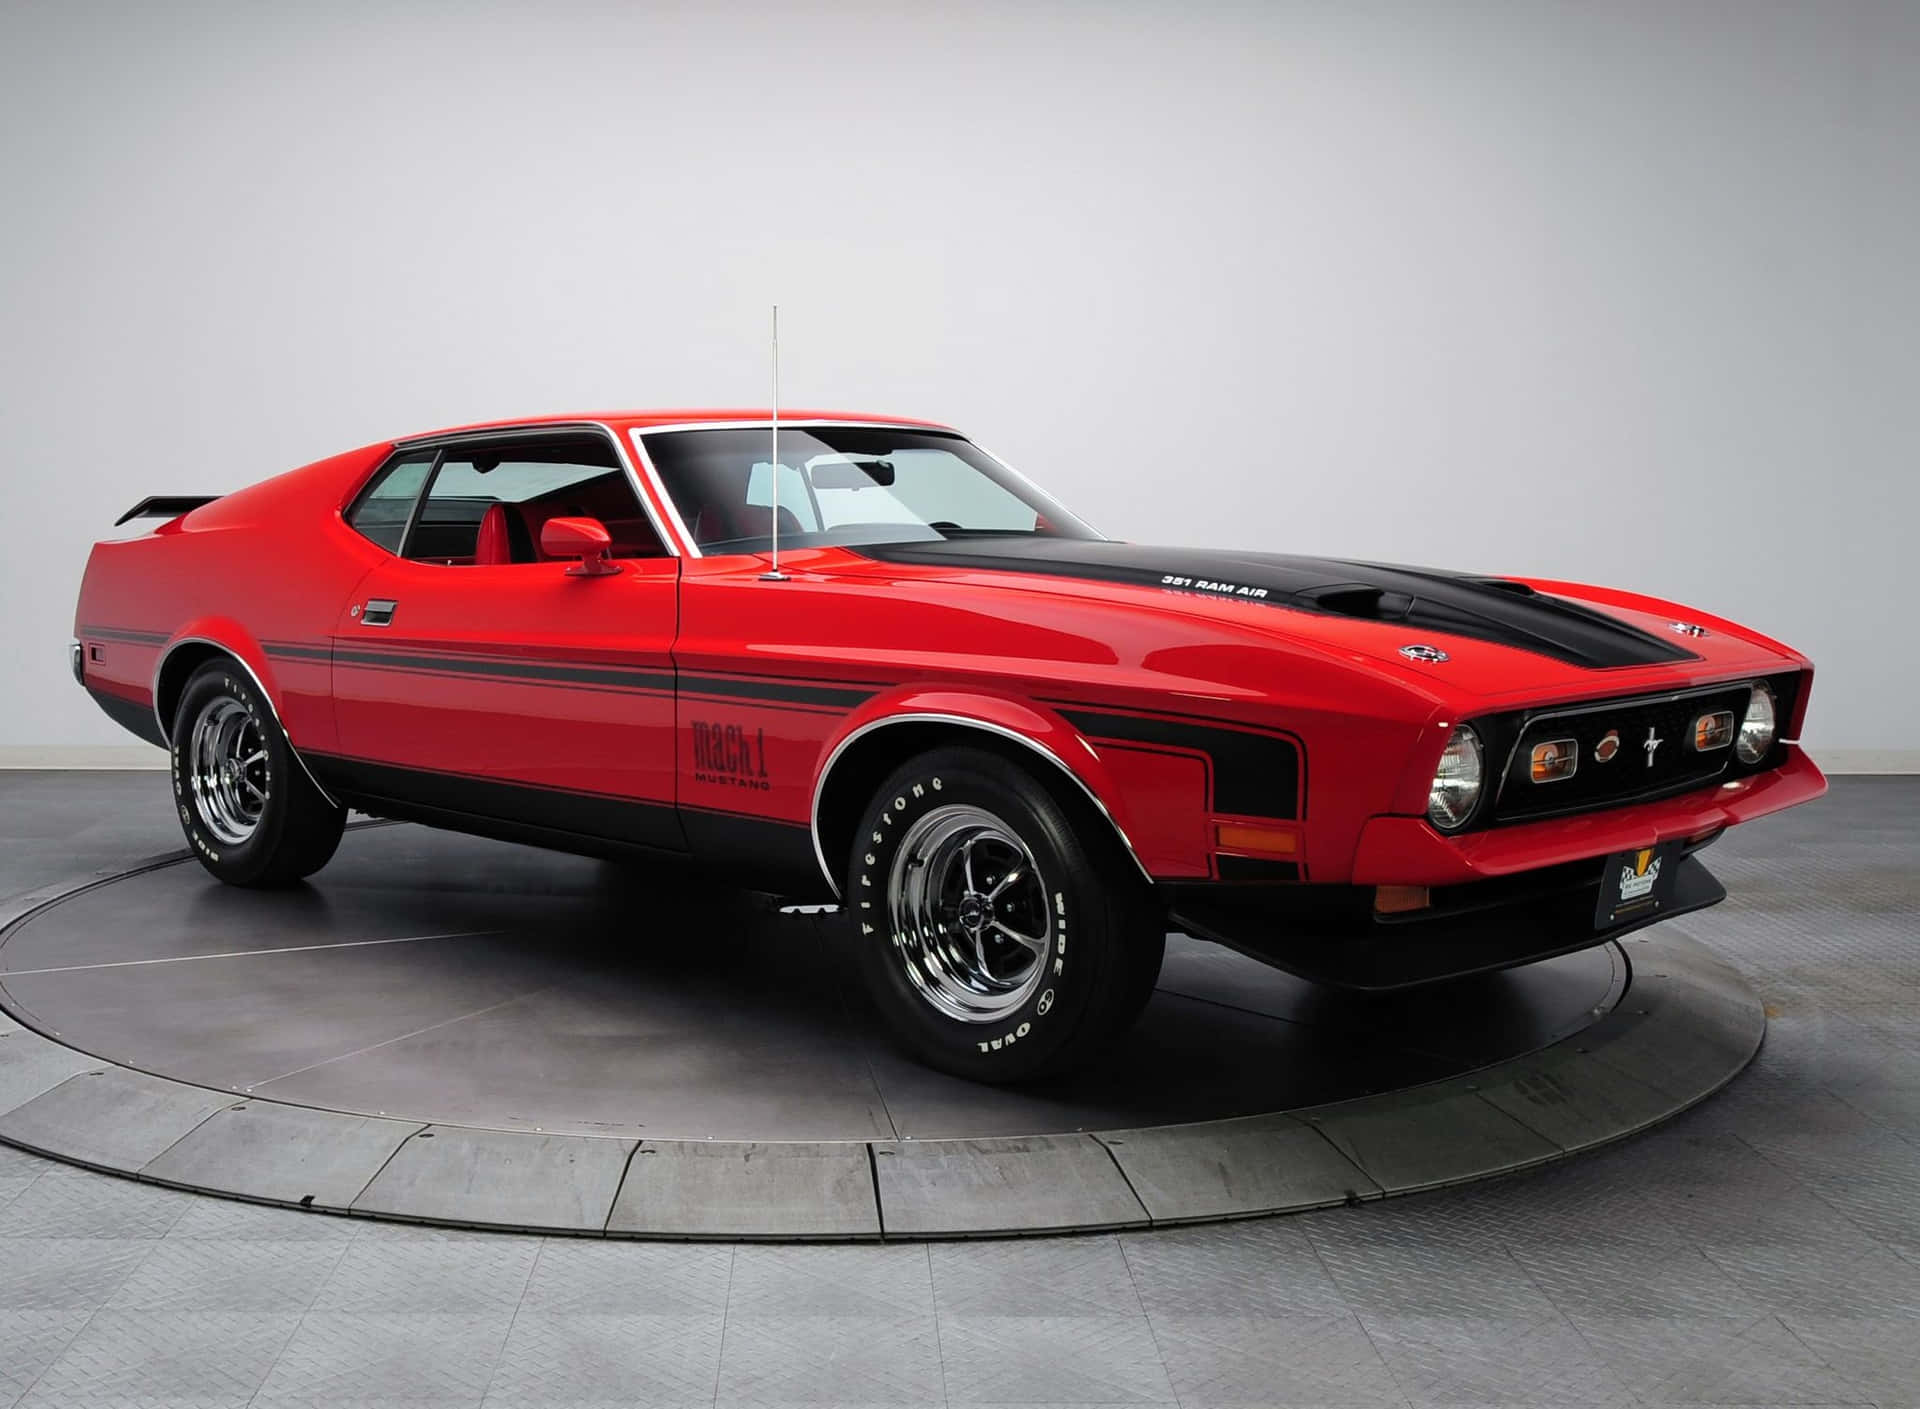 A sleek Ford Mustang Mach 1 in its full glory Wallpaper